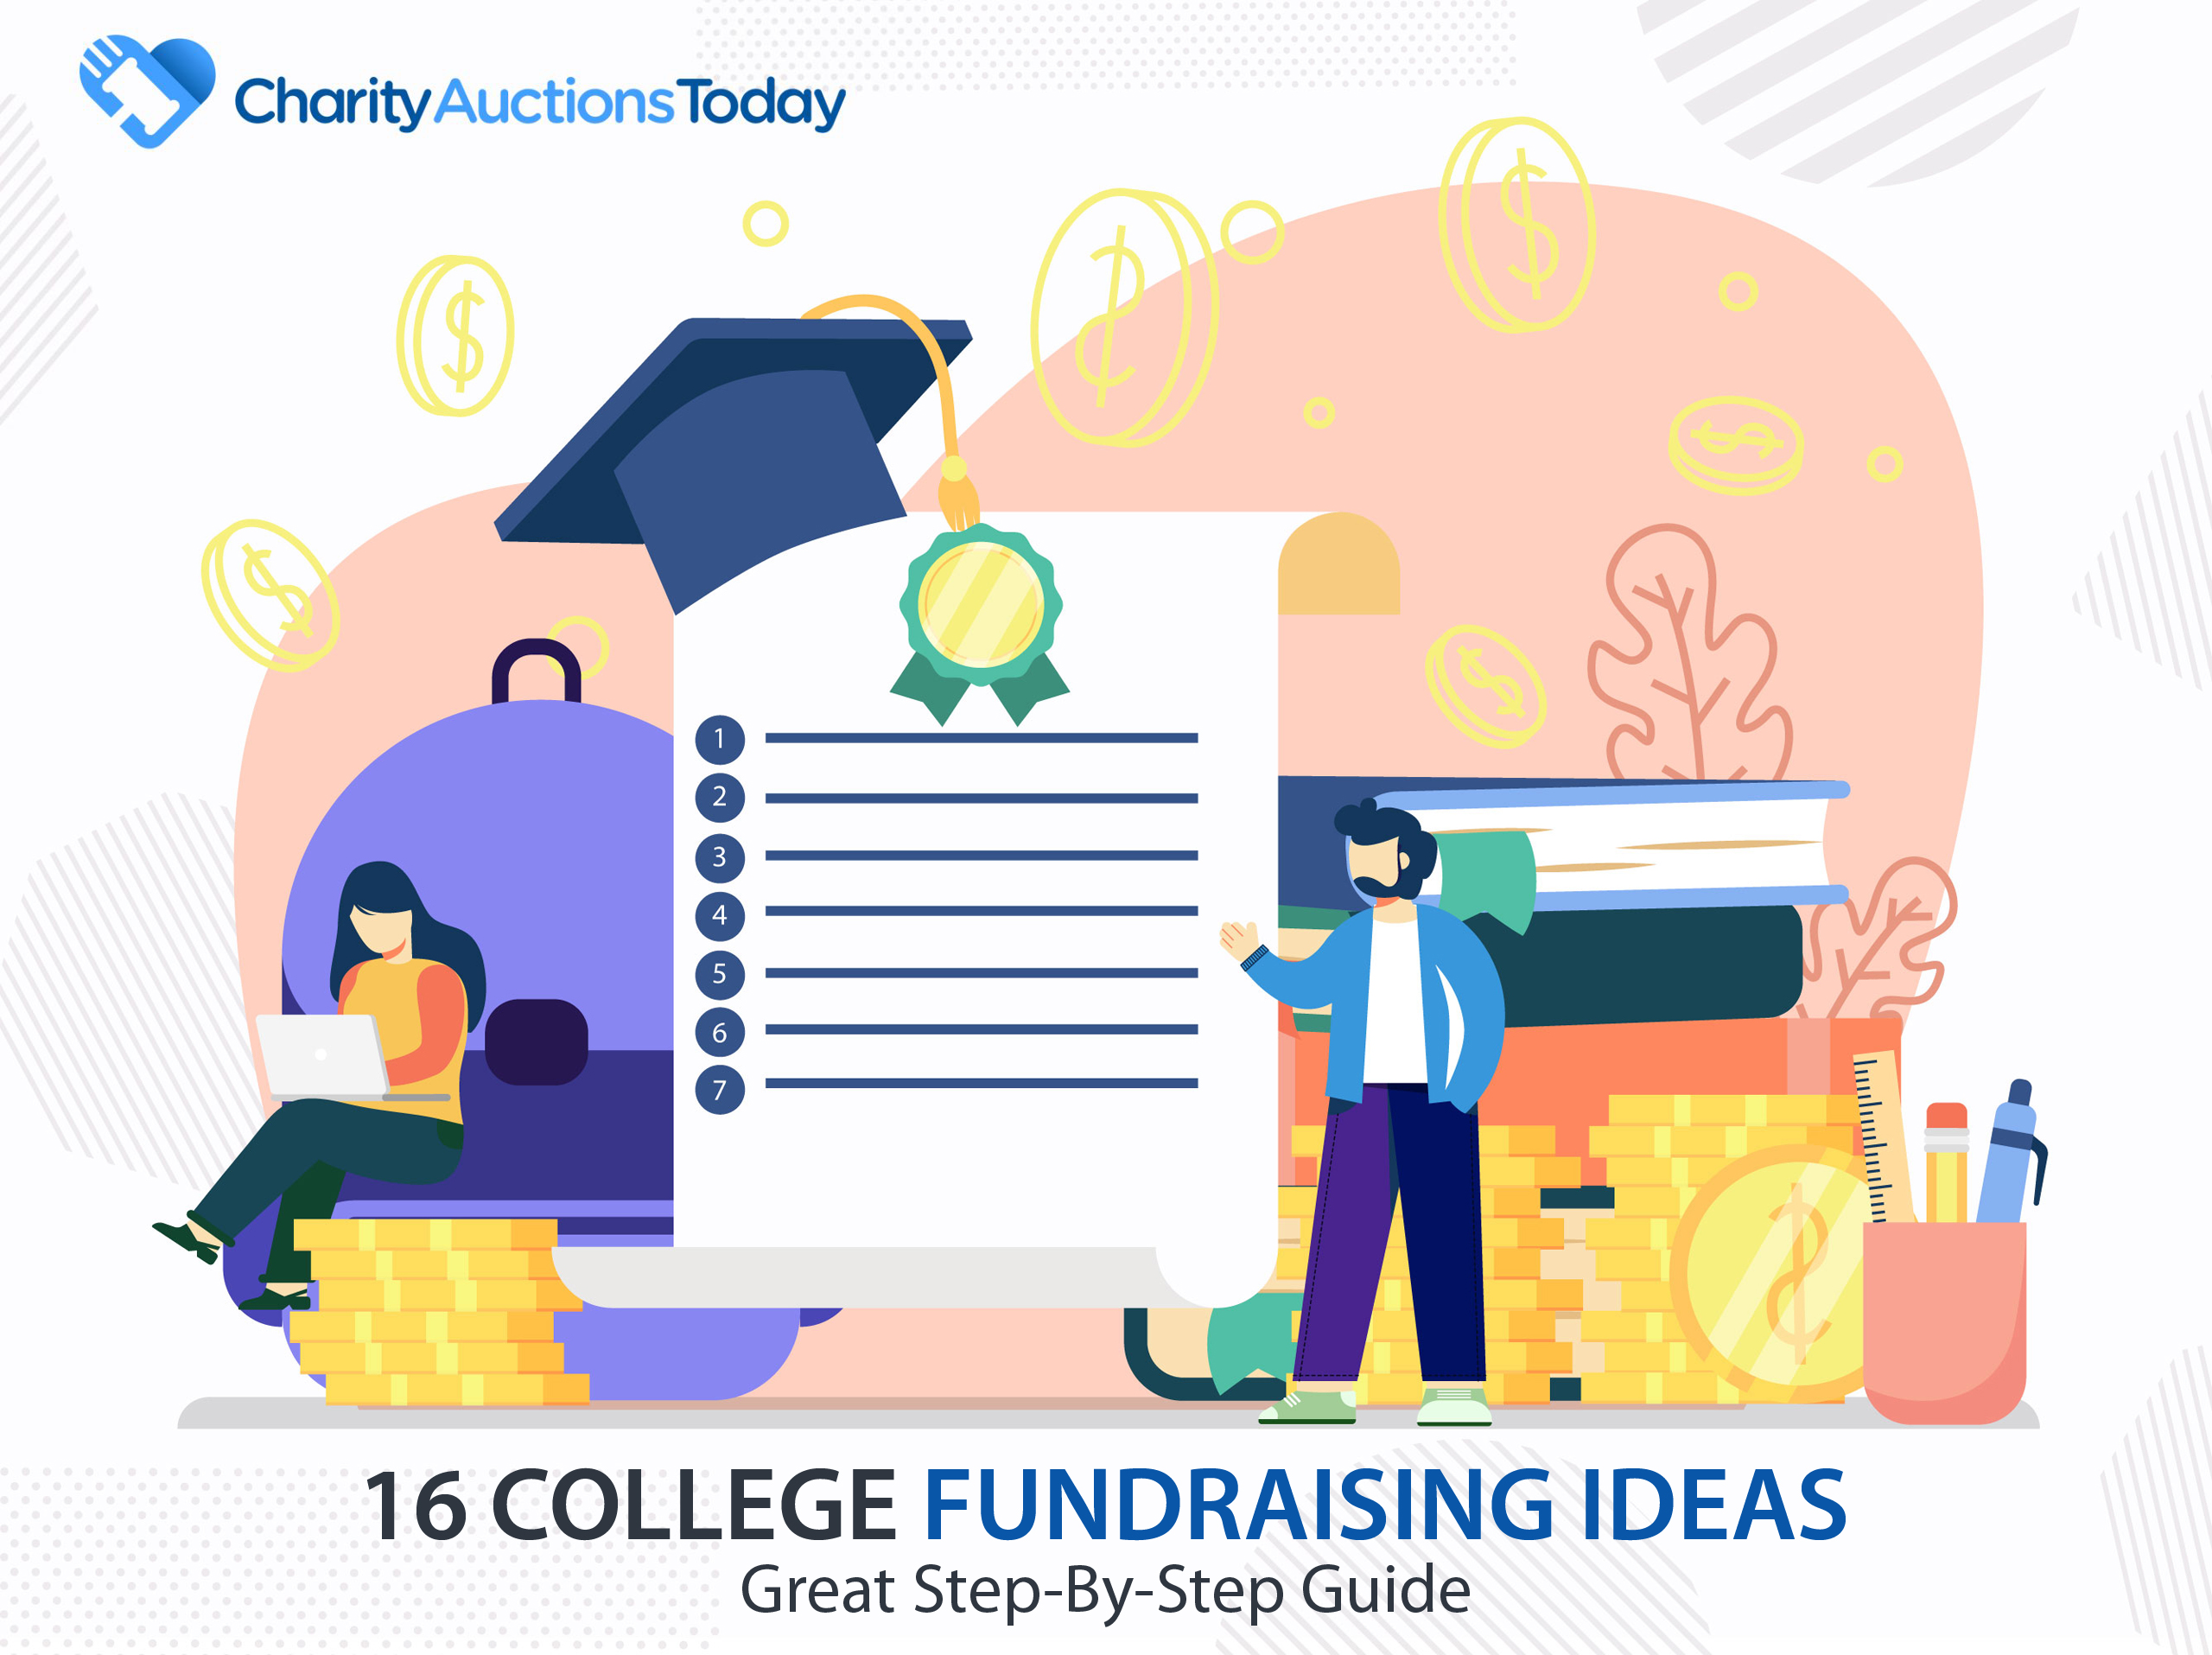 fundraising-ideas-for-college-charity-auctions-today